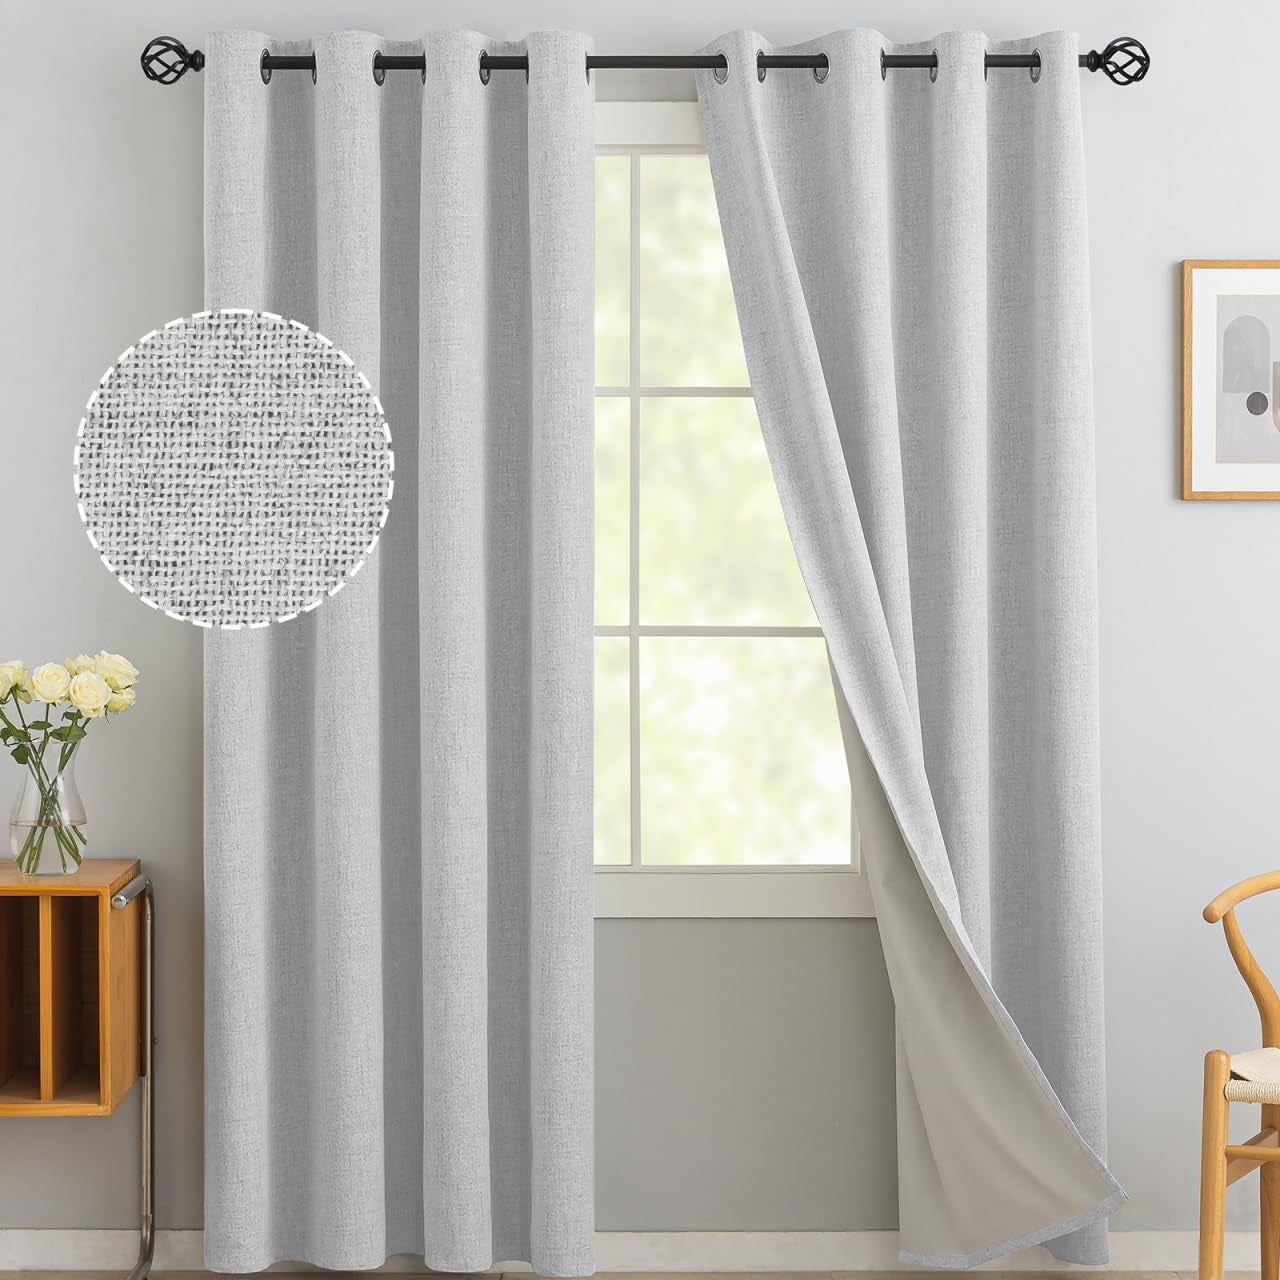 Yakamok Natural Linen Curtains 100% Blackout 84 Inches Long,Room Darkening Textured Curtains for Living Room Thermal Grommet Bedroom Curtains 2 Panels with Greyish White Liner  Yakamok White 52W X 90L / 2 Panels 